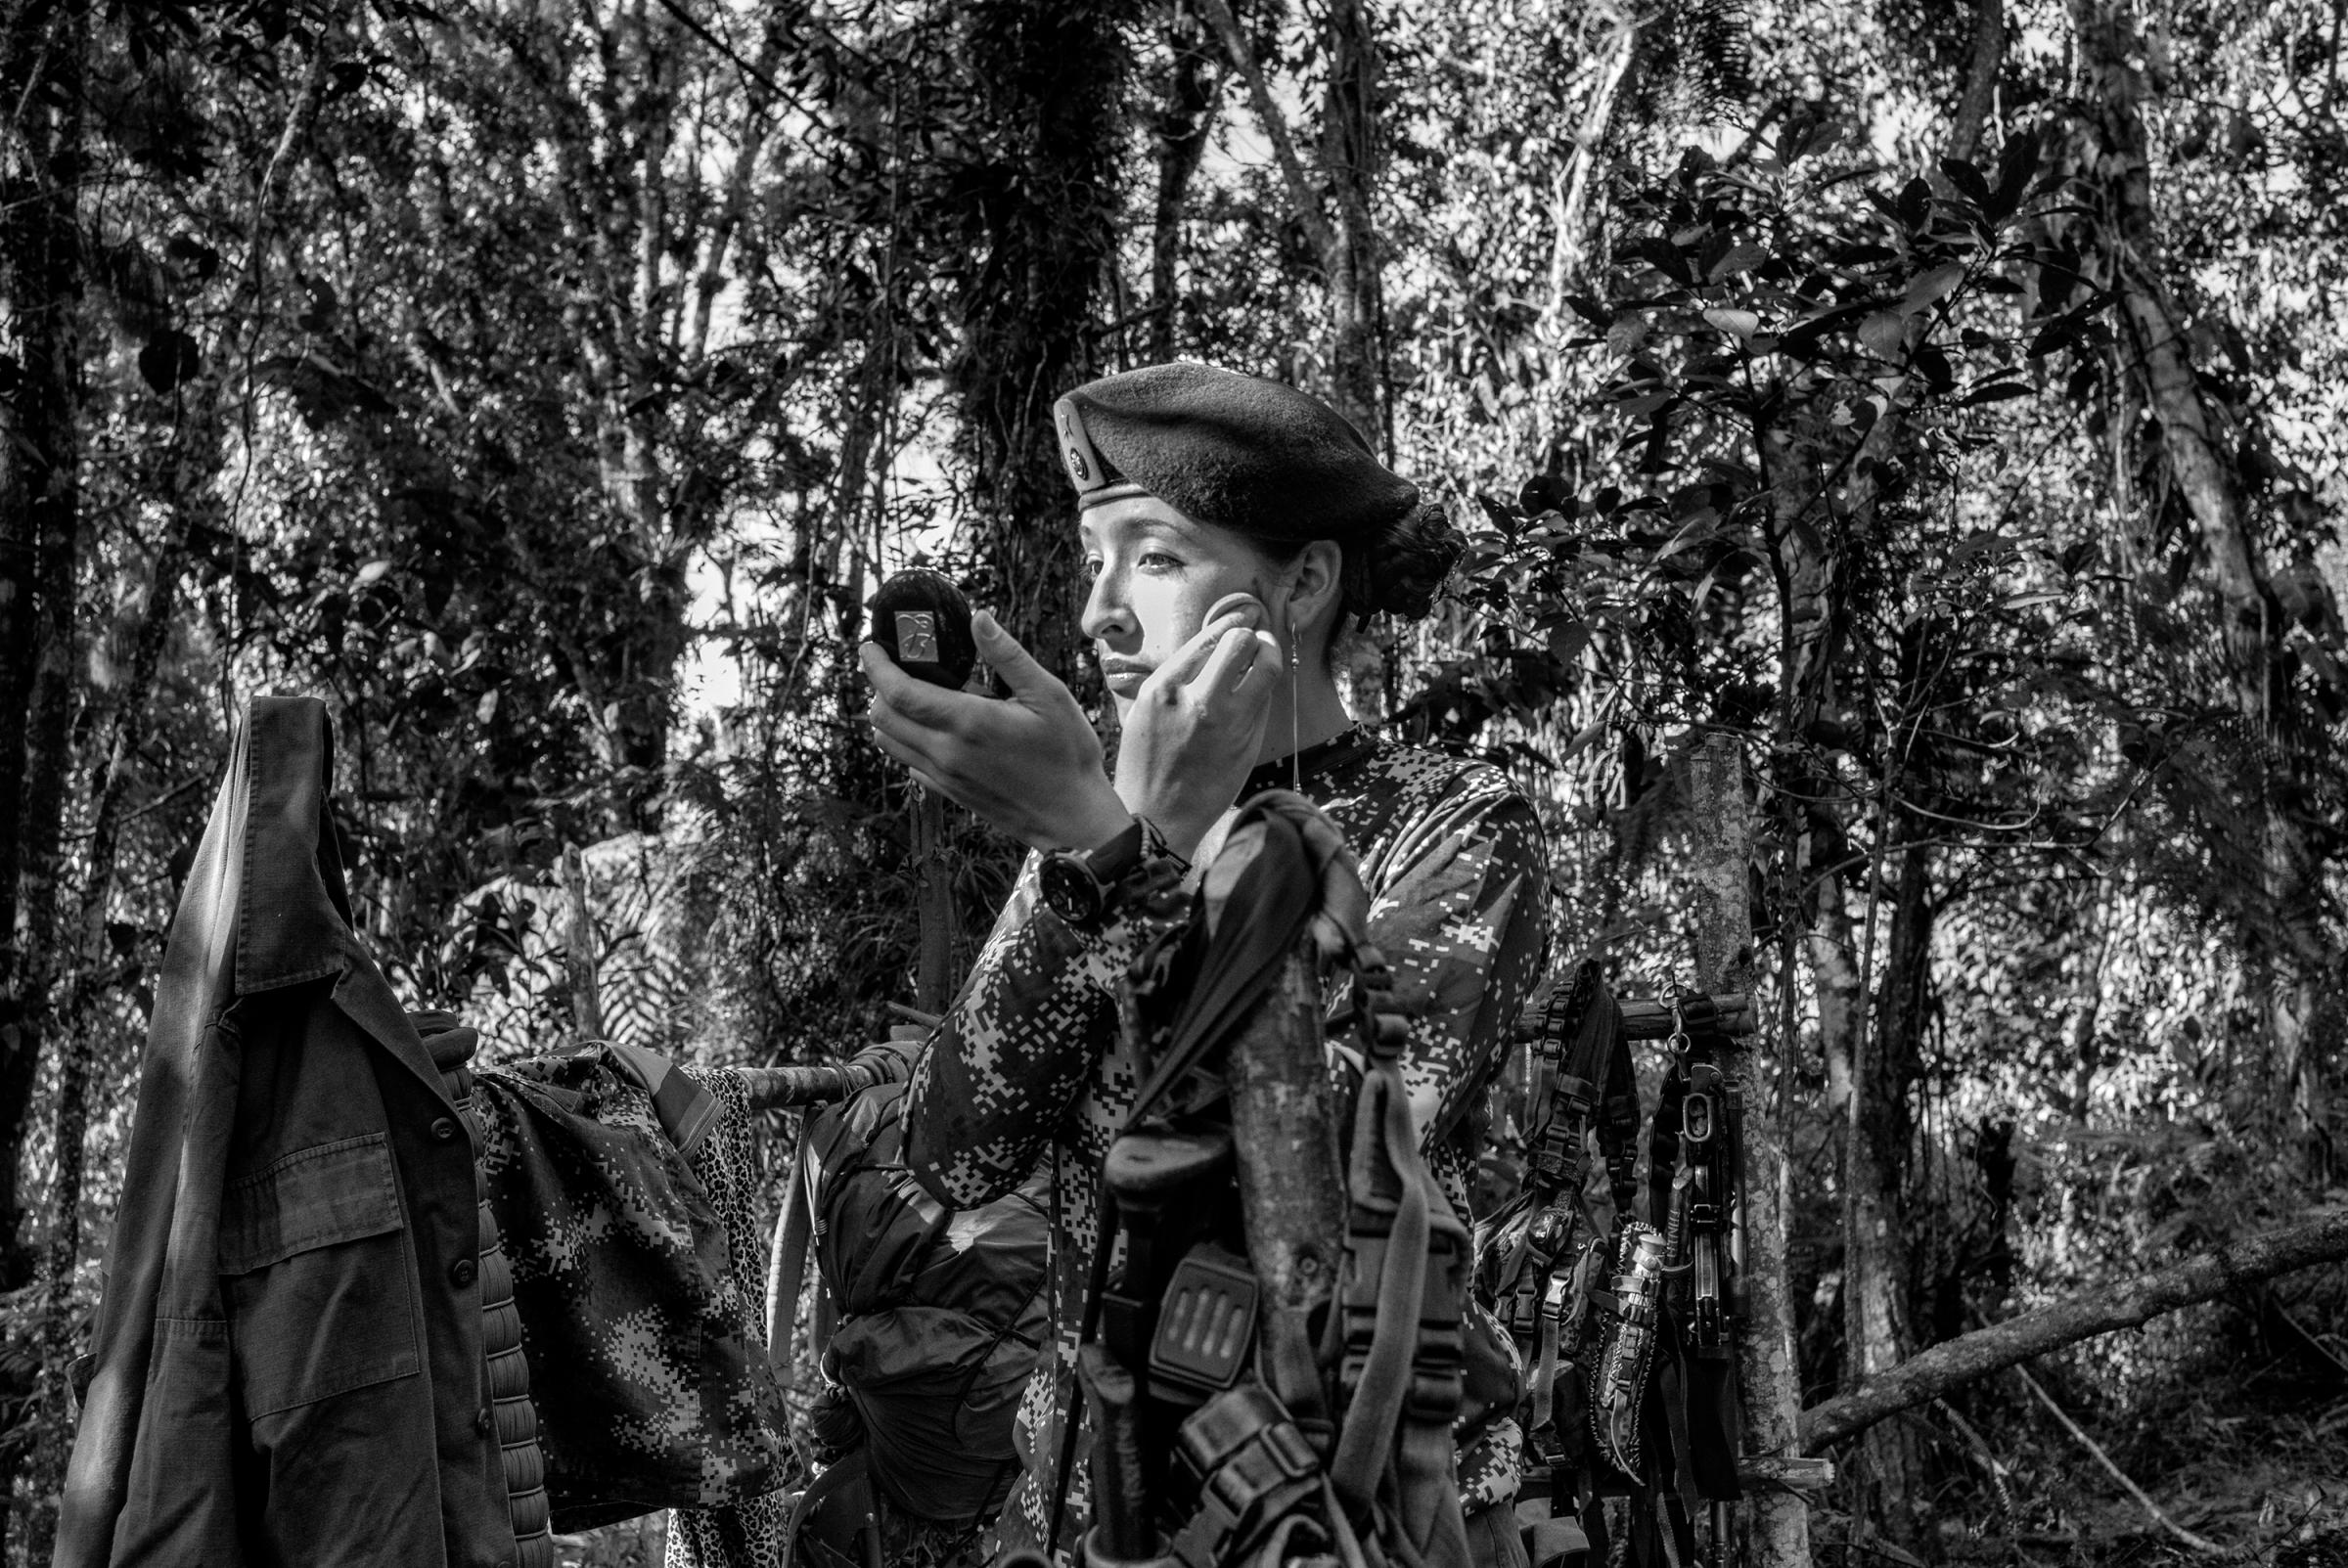 Tania, A FARC guerrilla member, puts on makeup at a camp, Cauca, Colombia. On Oct. 2, 2016, Colombians will vote in a referendum to end Colombia's 52-year old conflict between FARC, the military and right-wing paramilitaries, July 2016.